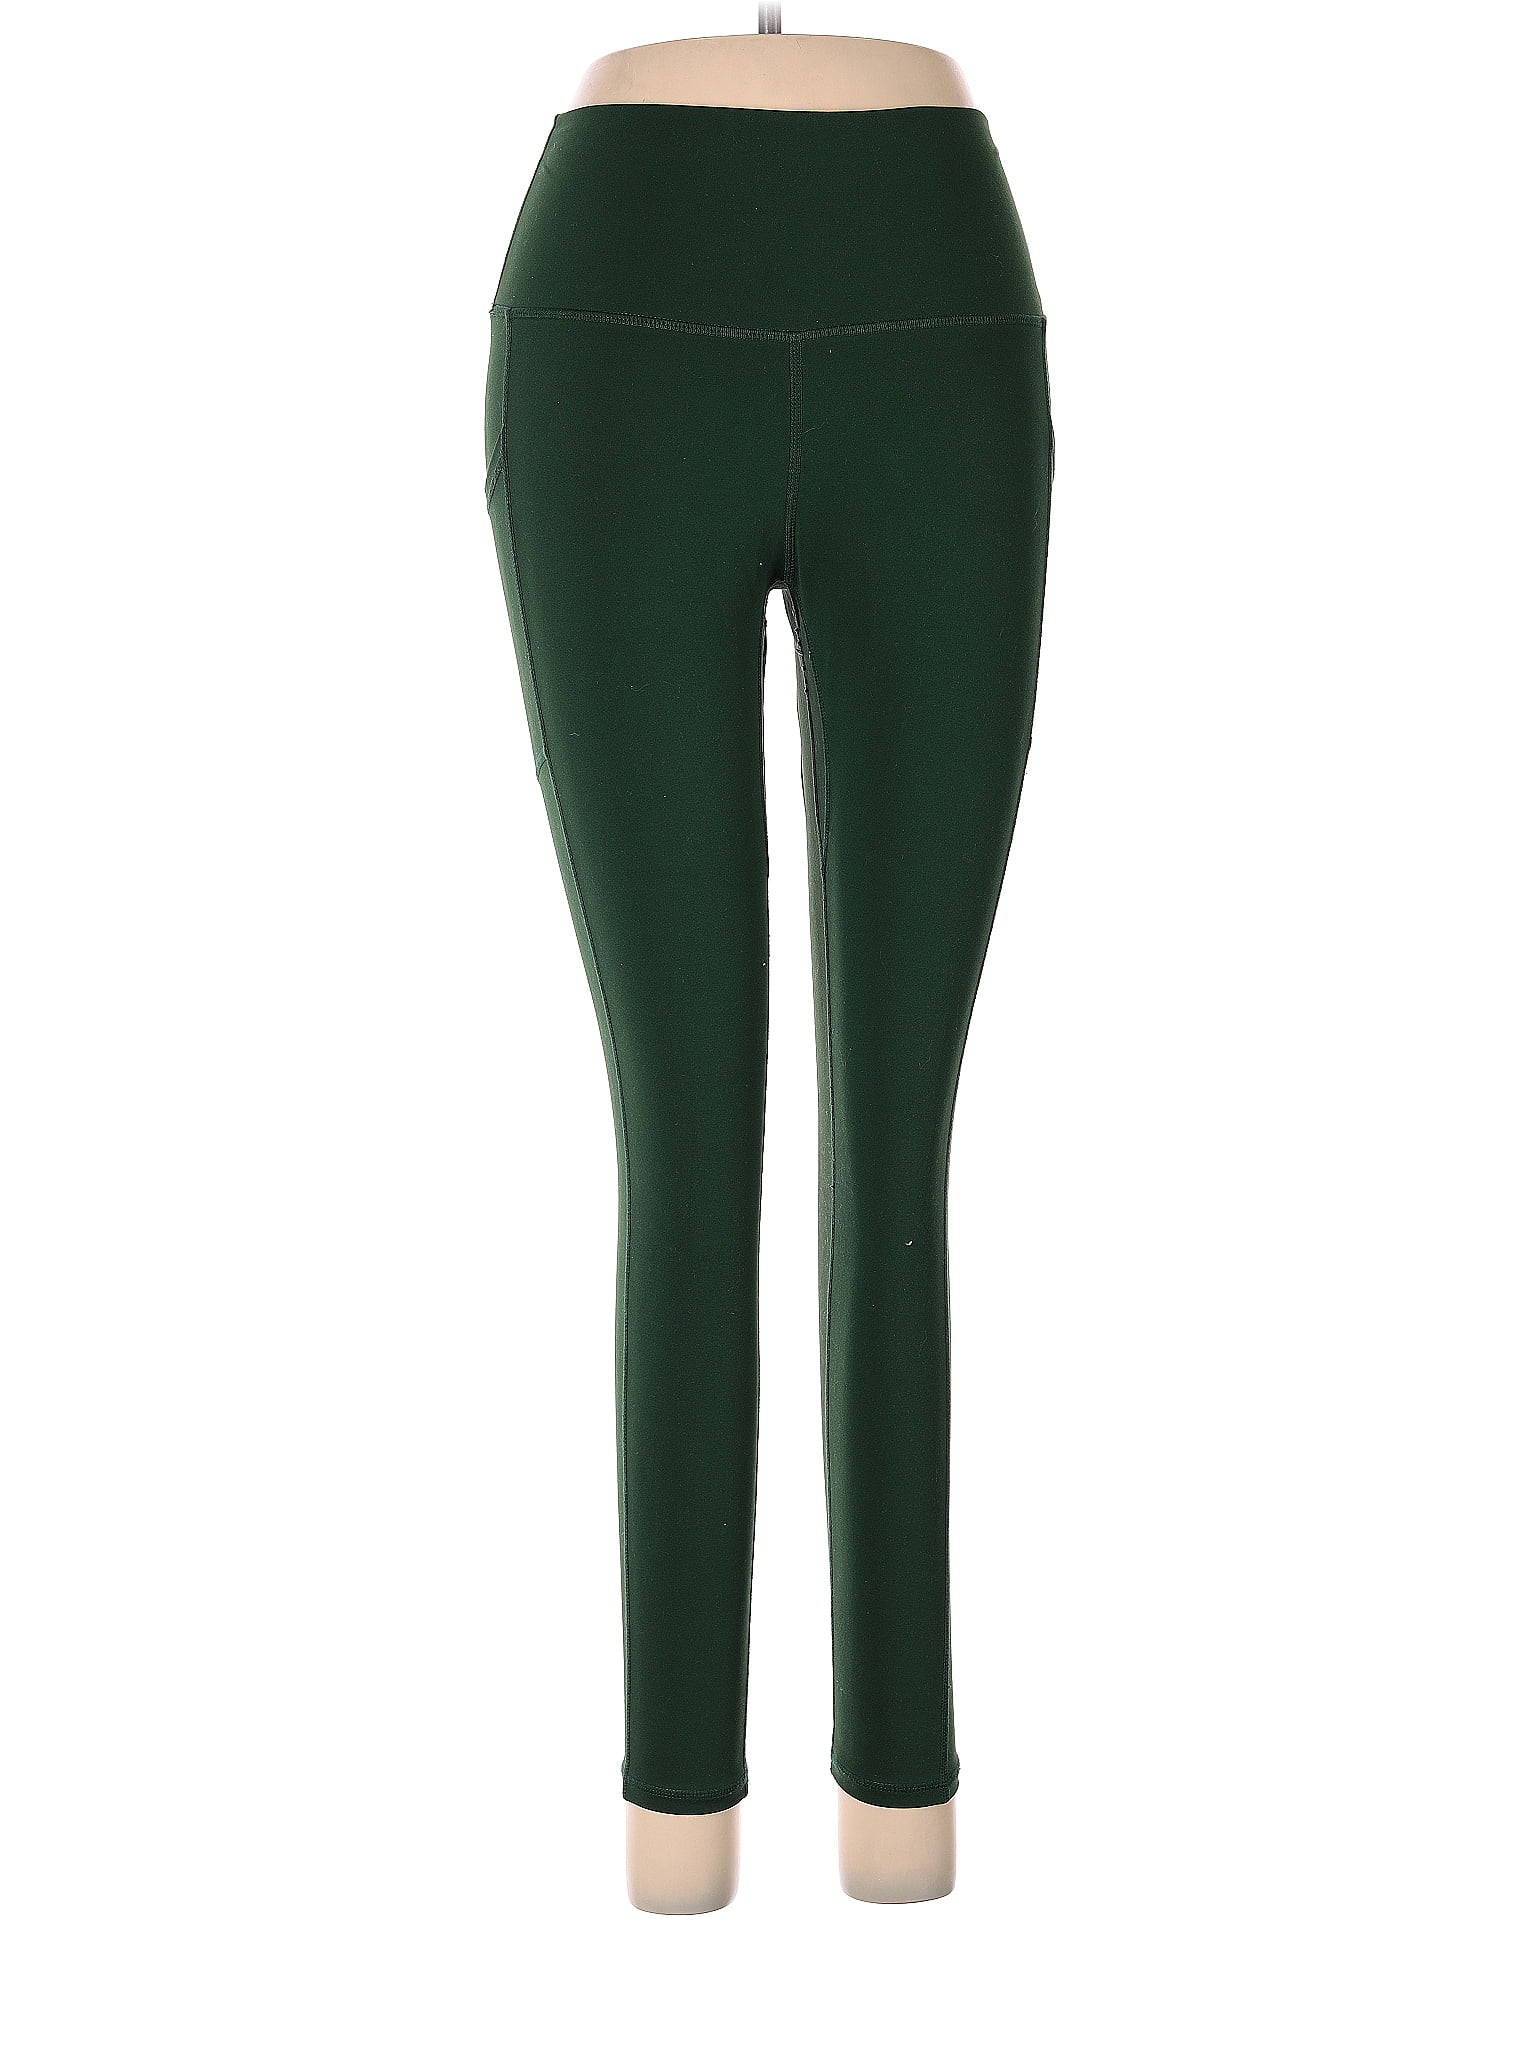 colorfulkoala Solid Green Active Pants Size M - 54% off